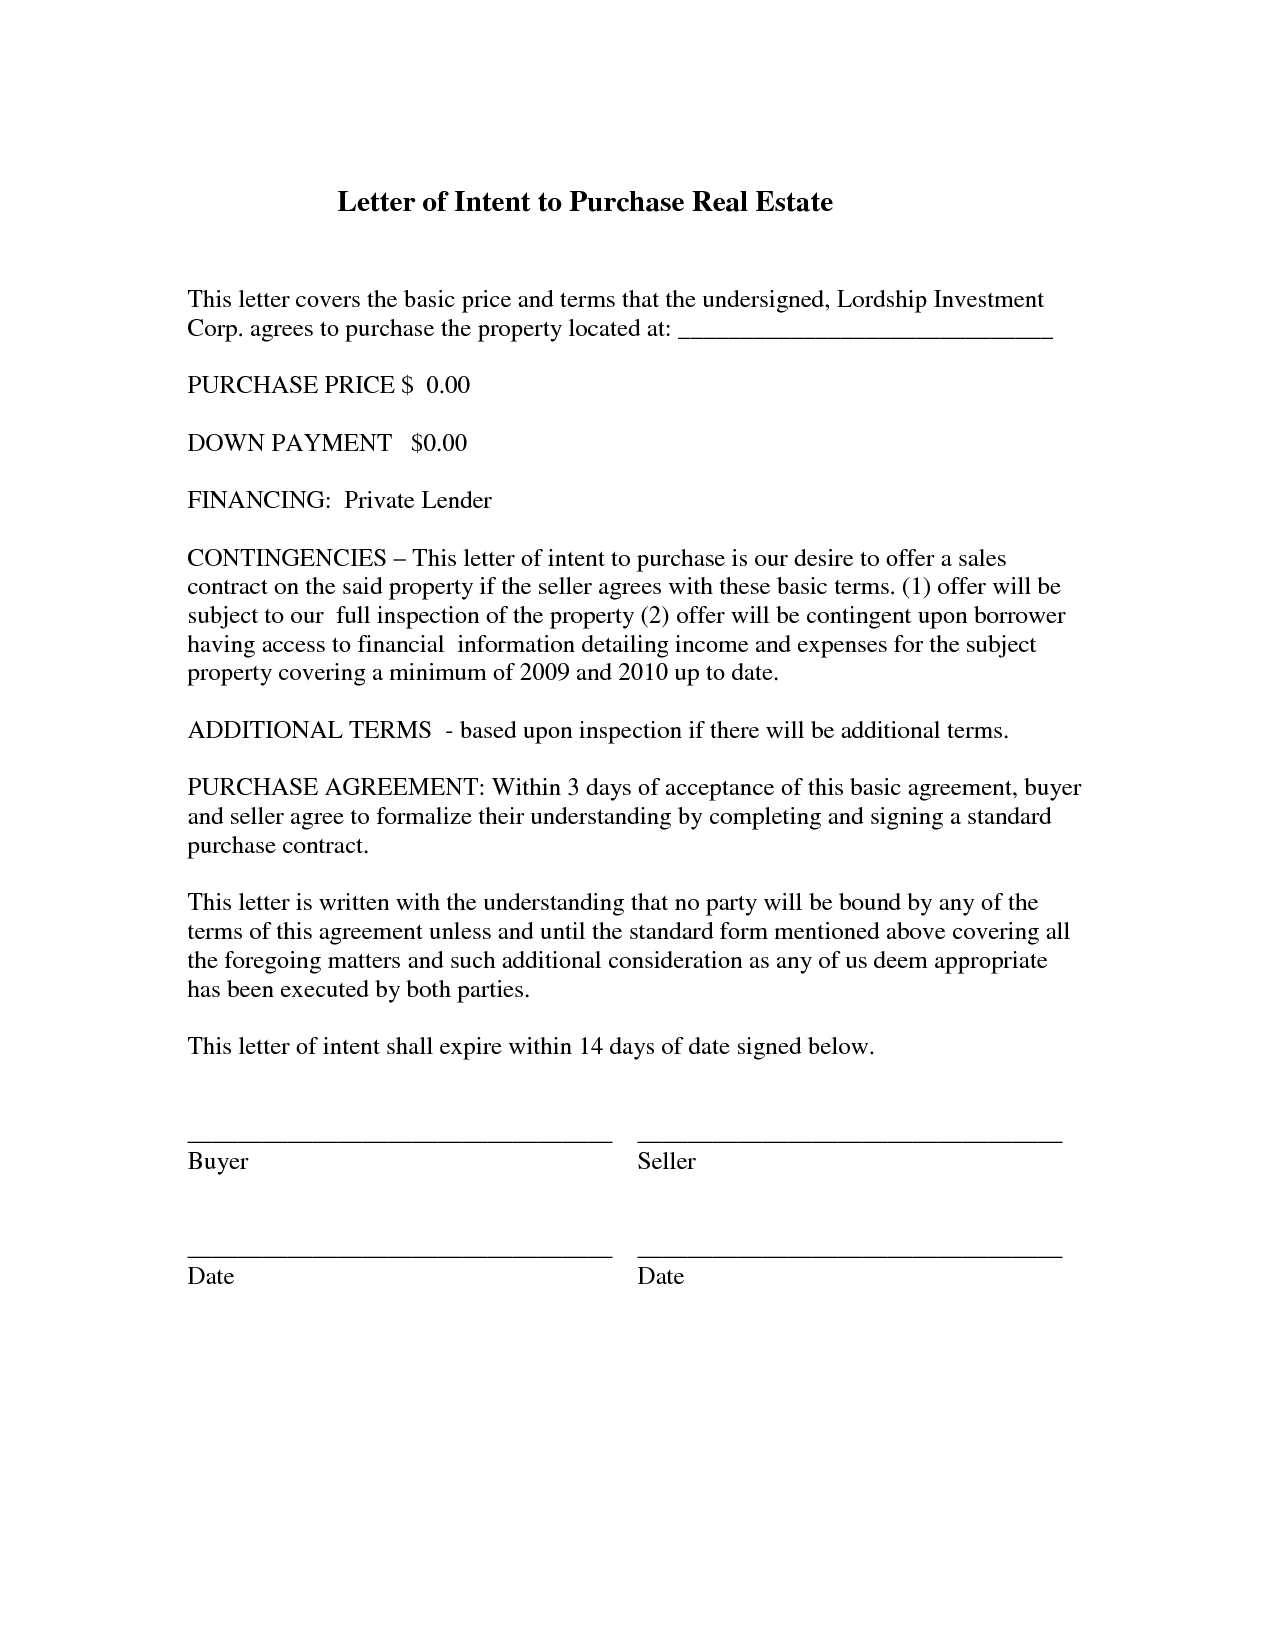 Commercial Real Estate Letter Of Intent Template - Letter Intent Purchase Real Estate High Definition to Texas